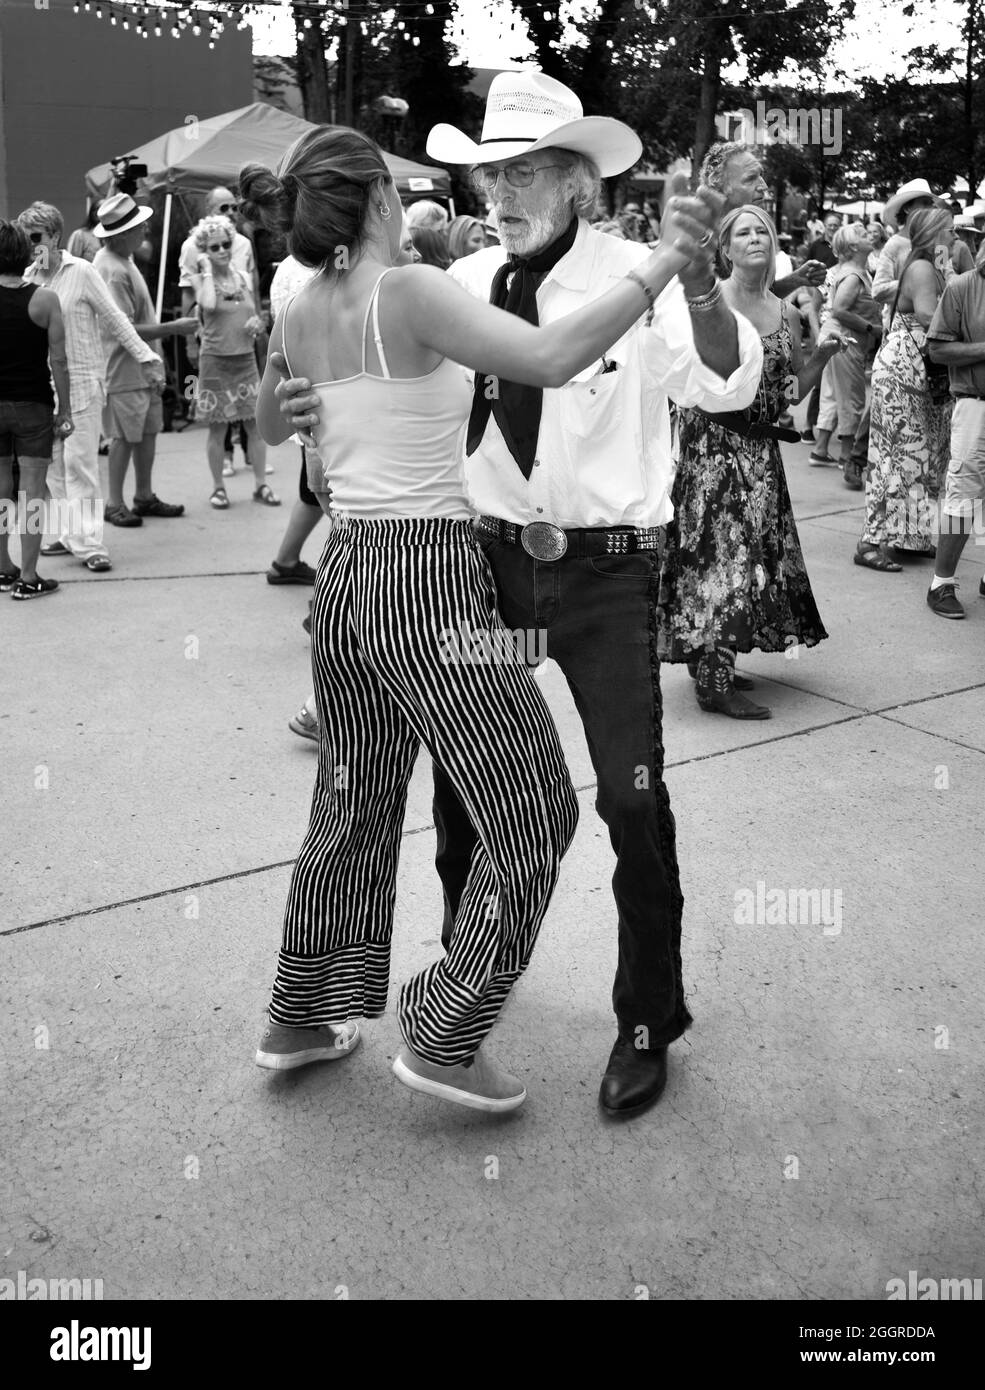 Couples dance at an outdoor music concert in the historic Plaza in Santa Fe, New Mexico. Stock Photo